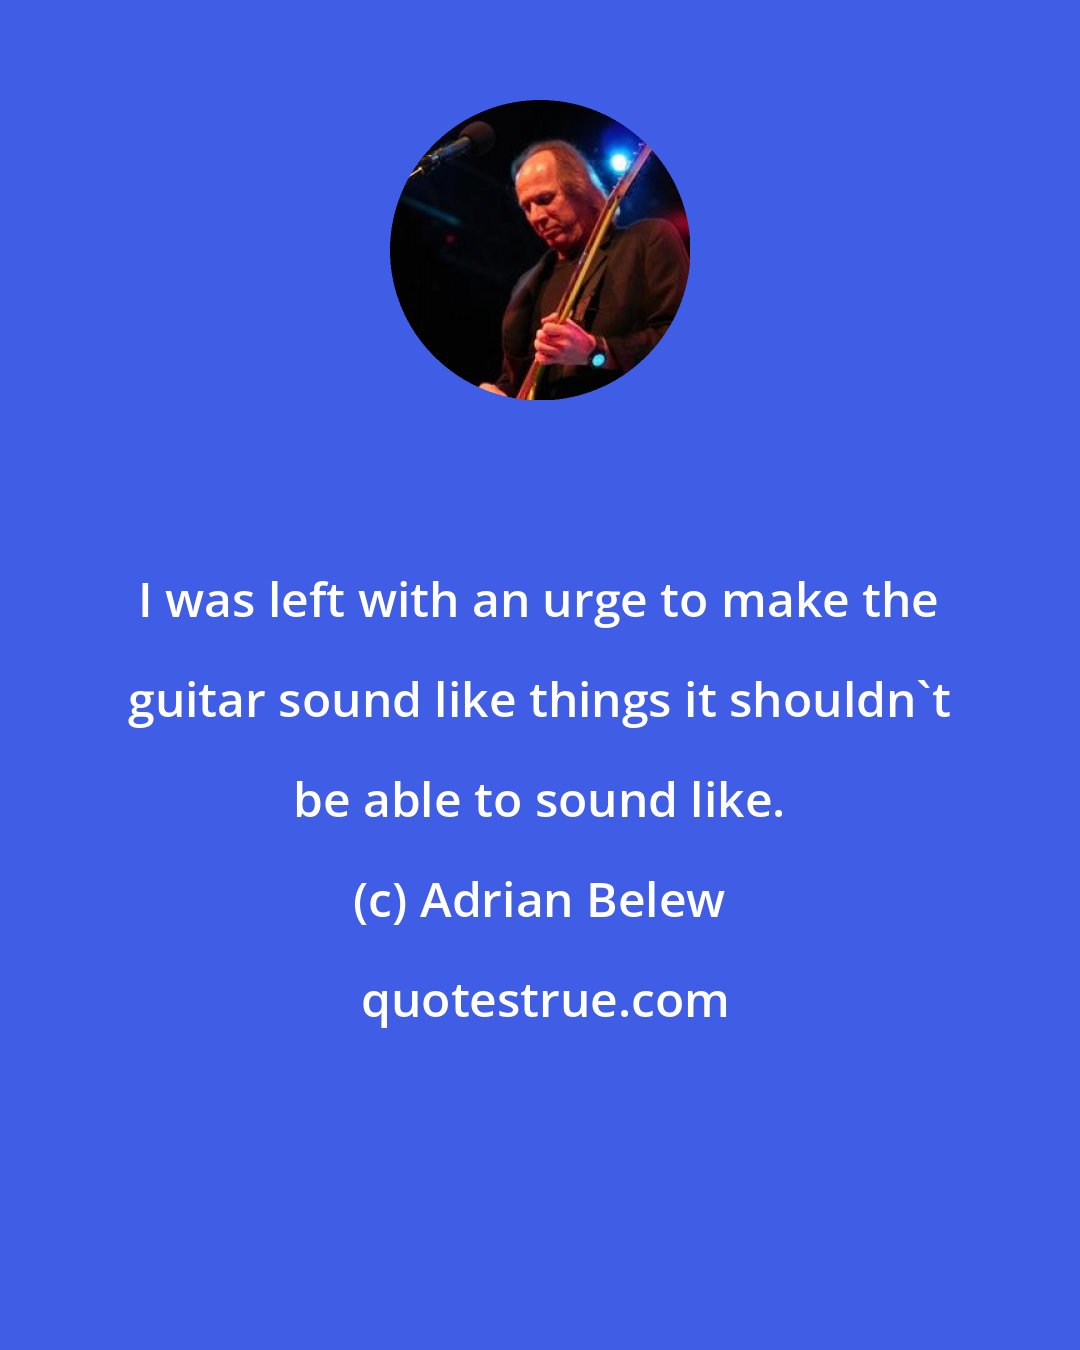 Adrian Belew: I was left with an urge to make the guitar sound like things it shouldn't be able to sound like.